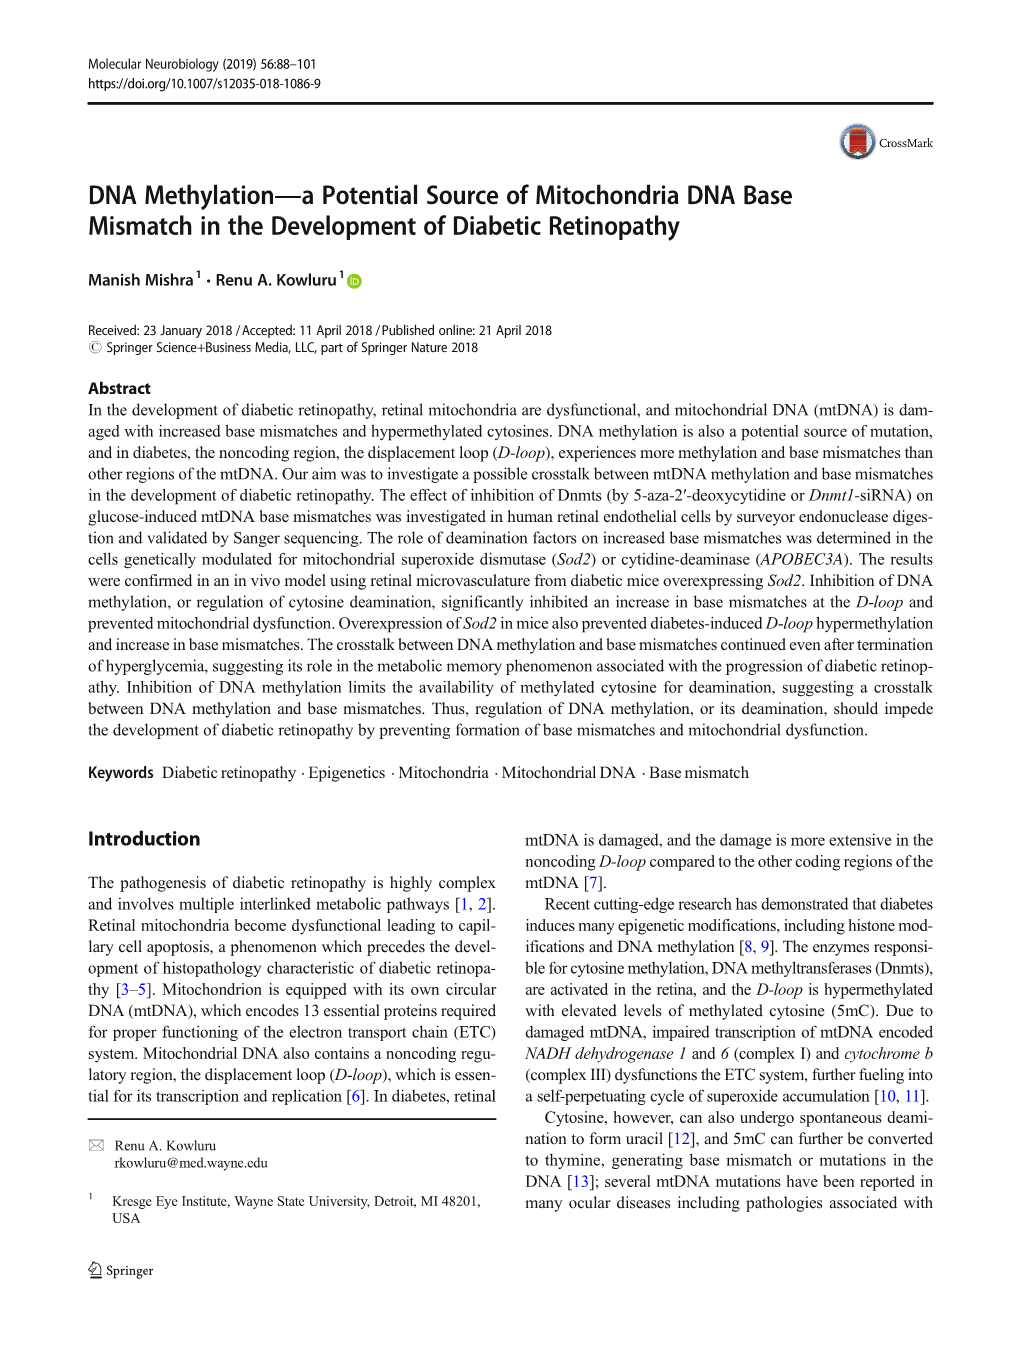 DNA Methylation—A Potential Source of Mitochondria DNA Base Mismatch in the Development of Diabetic Retinopathy